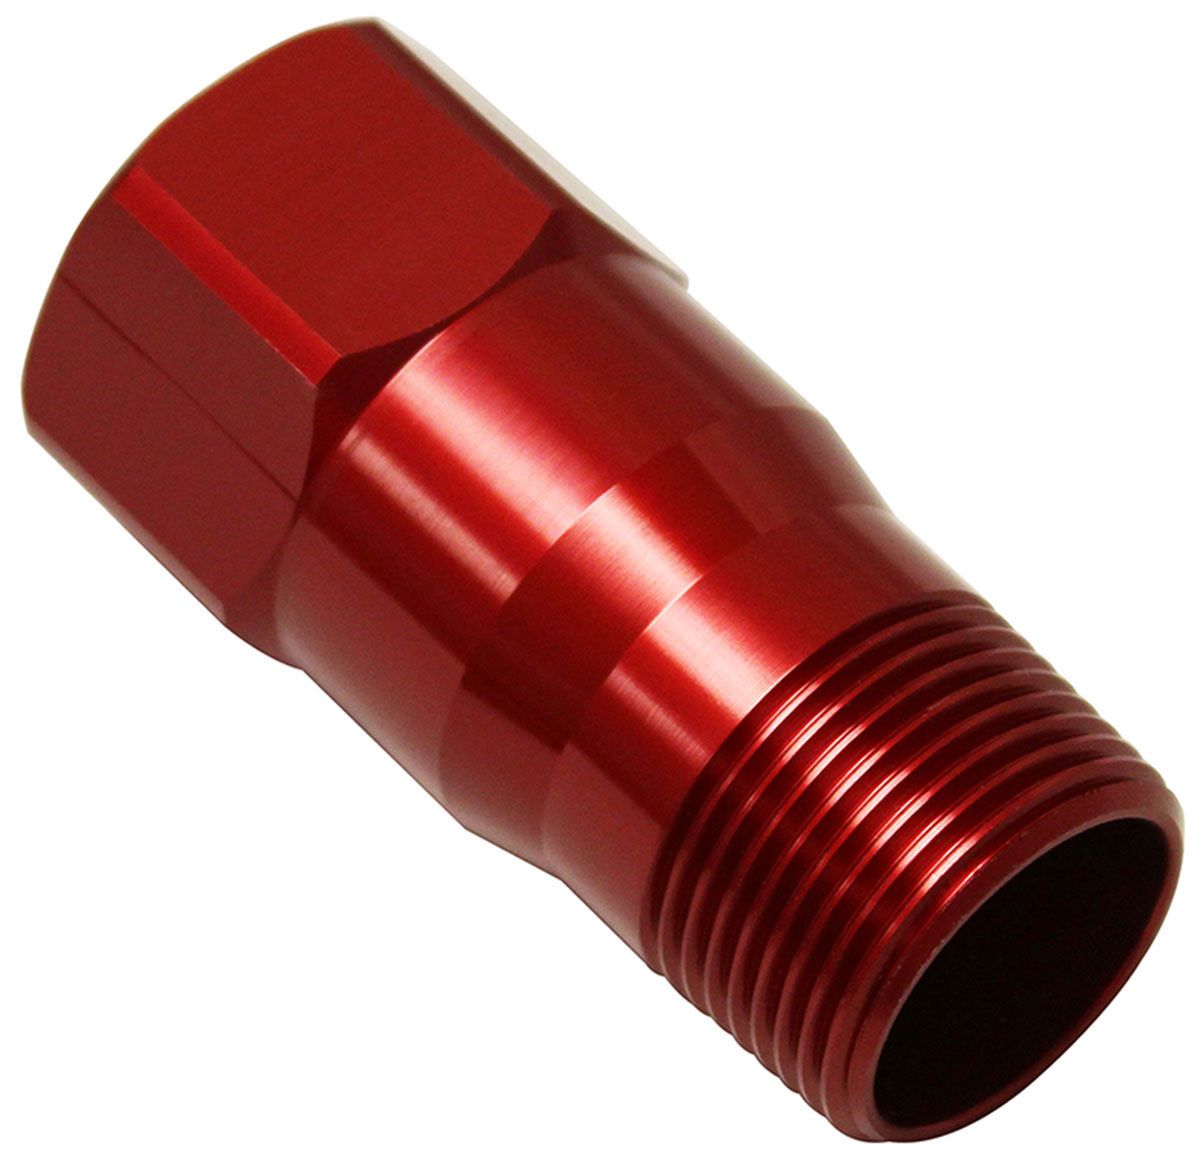 MZWP1000R - 2" LONG EXTENDED FITTING